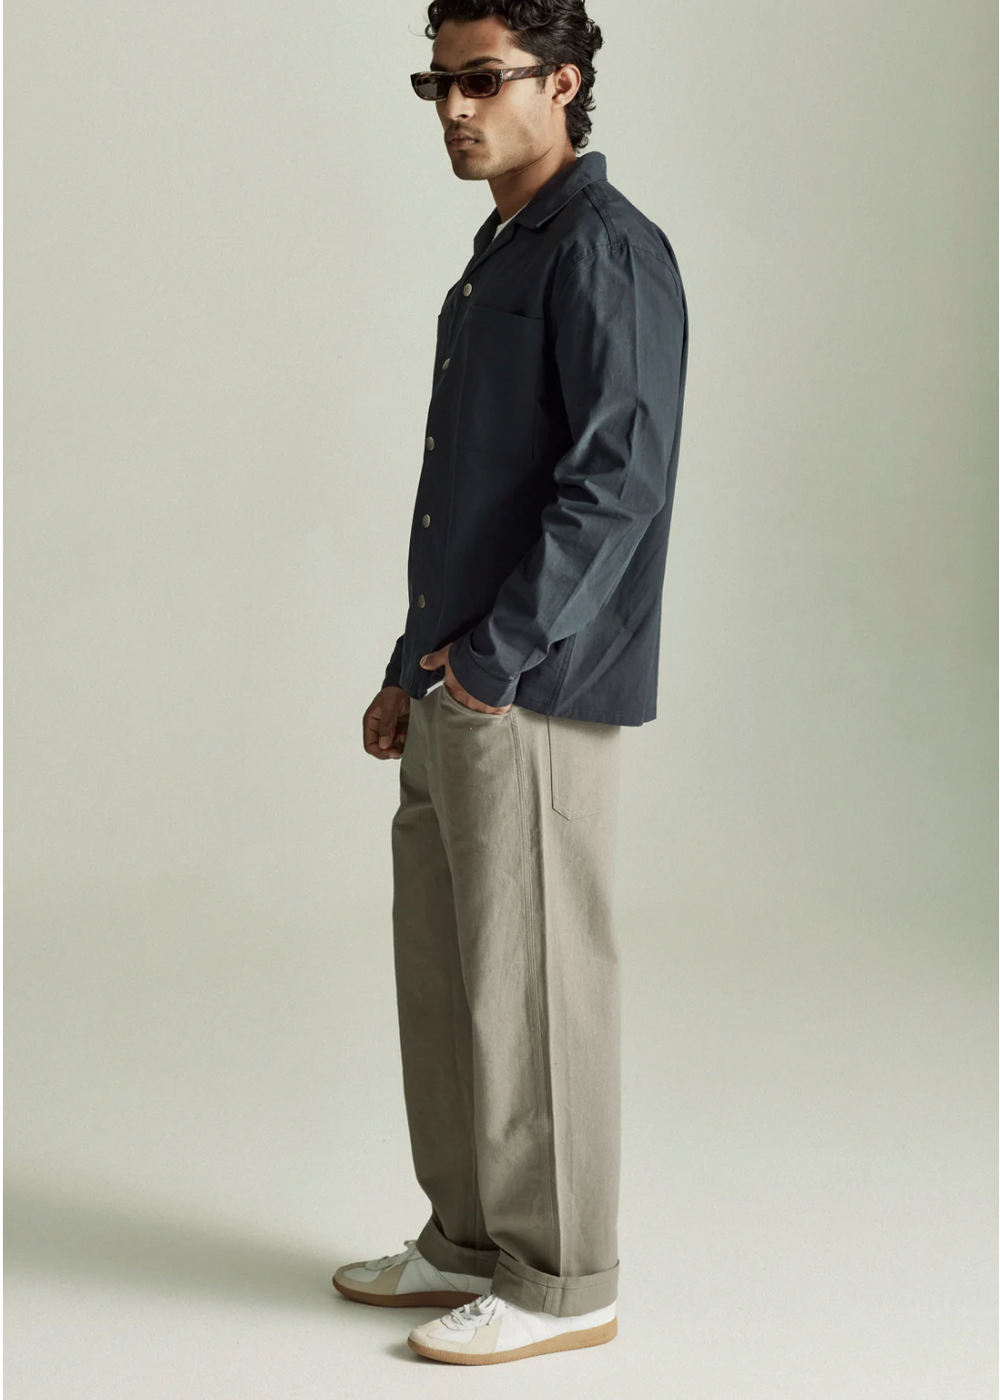 DRILL WORK SHIRT / NAVY | COMMONERS | Mad About The Boy